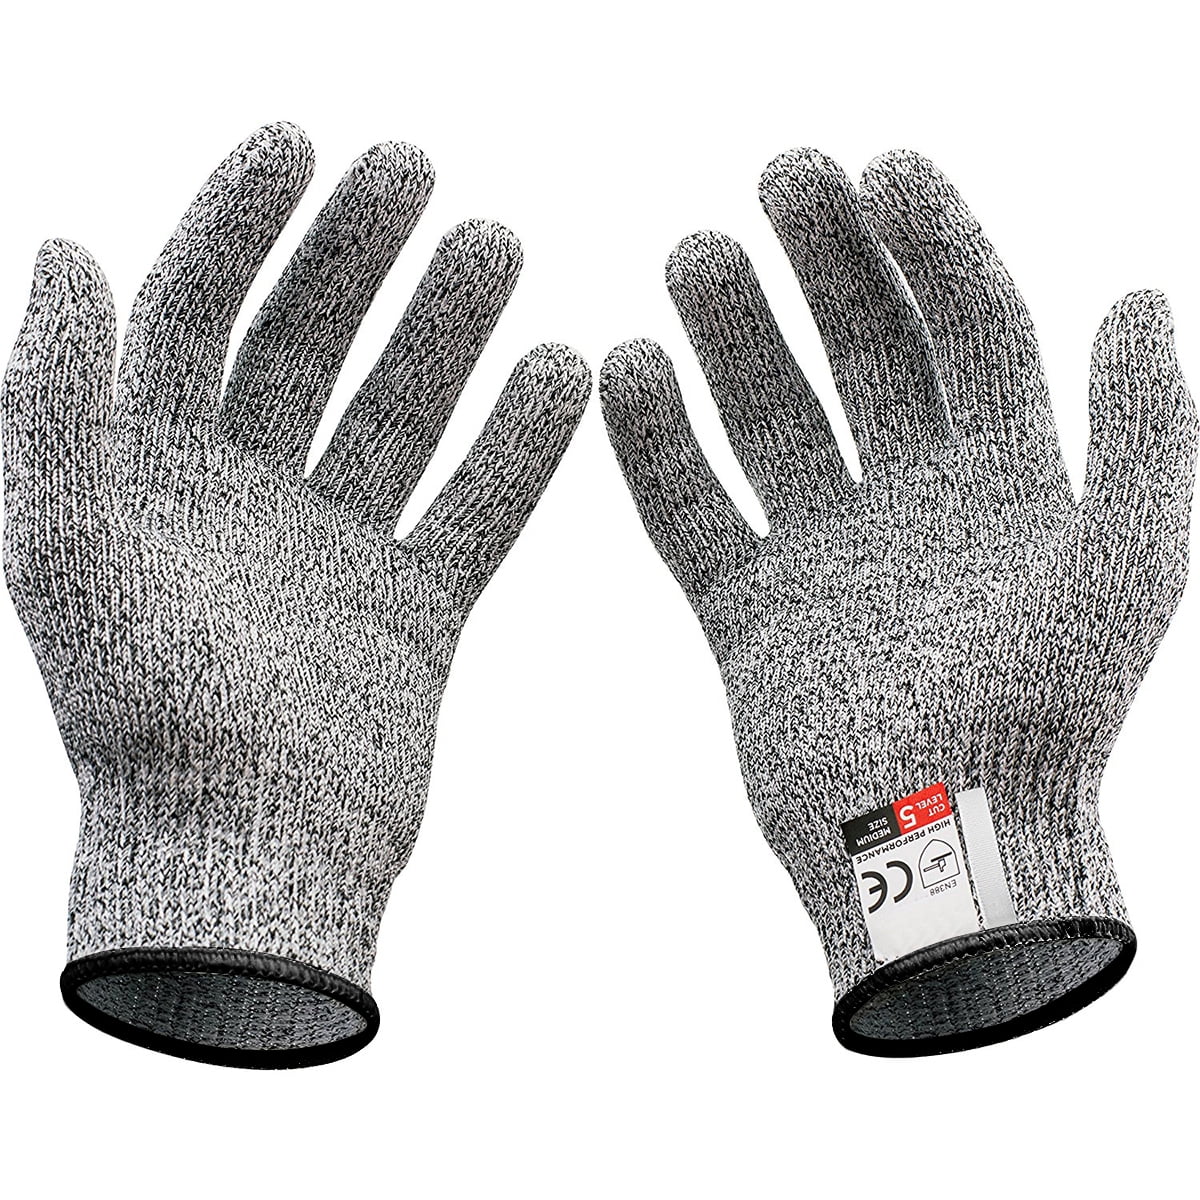 Medium Also for Gardening Safety Work Cut Proof Gloves Cut Resistant Kitchen Cutting Gloves Level 5 Protection 